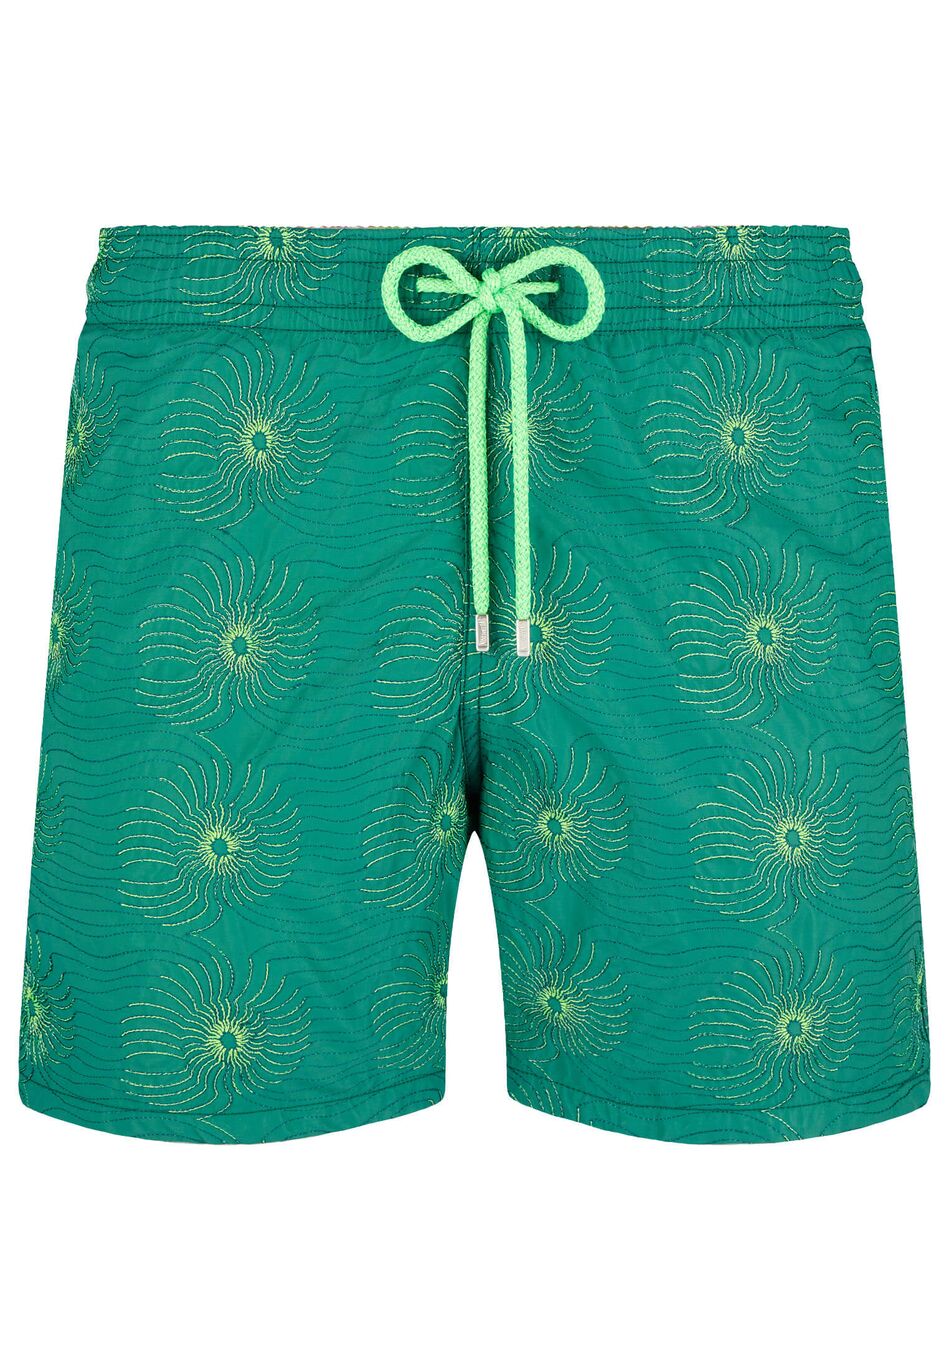 Embroidered Swim Shorts Hypno Shell - Limited Edition